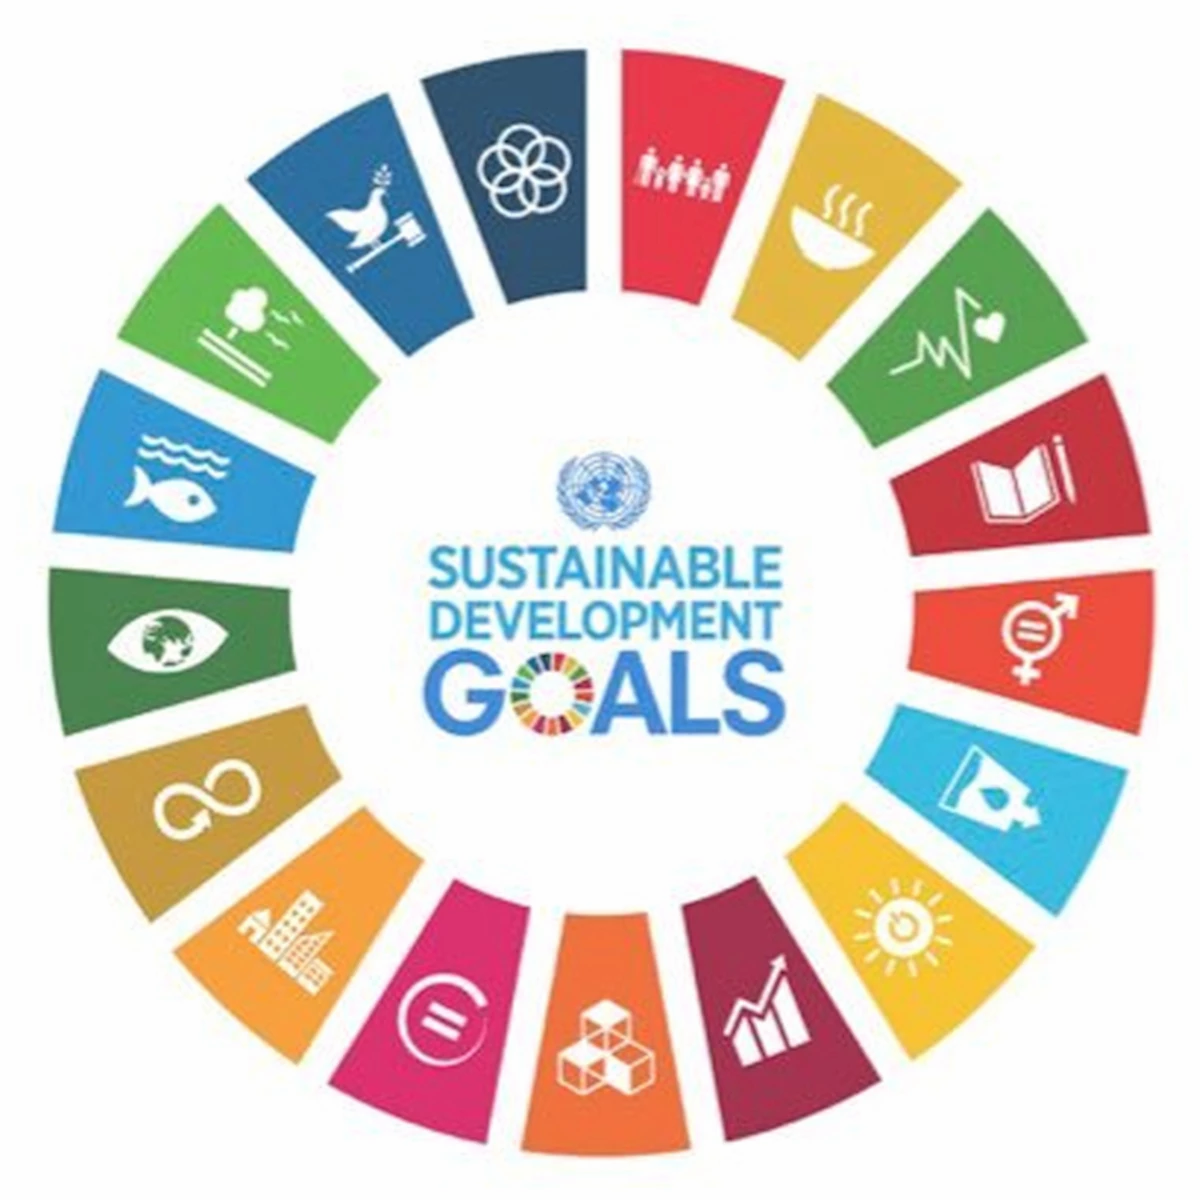 "SDG Goals and Bunkojunko: Working Towards a Sustainable Future"